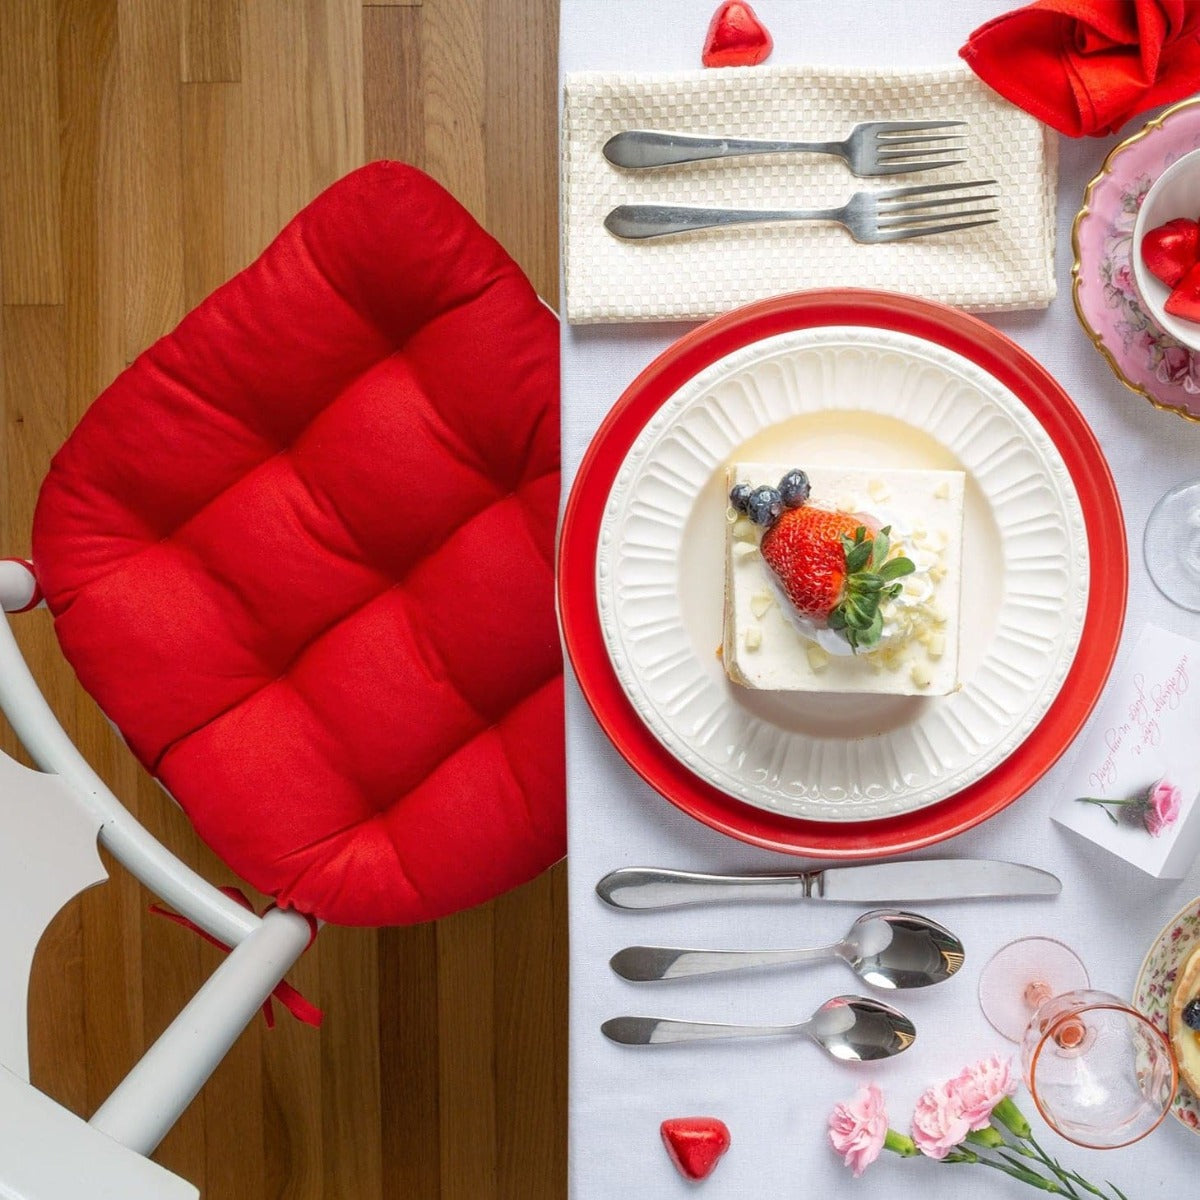 ruby red chair pads on vintage white dining chairs at dining room table set for valentines party